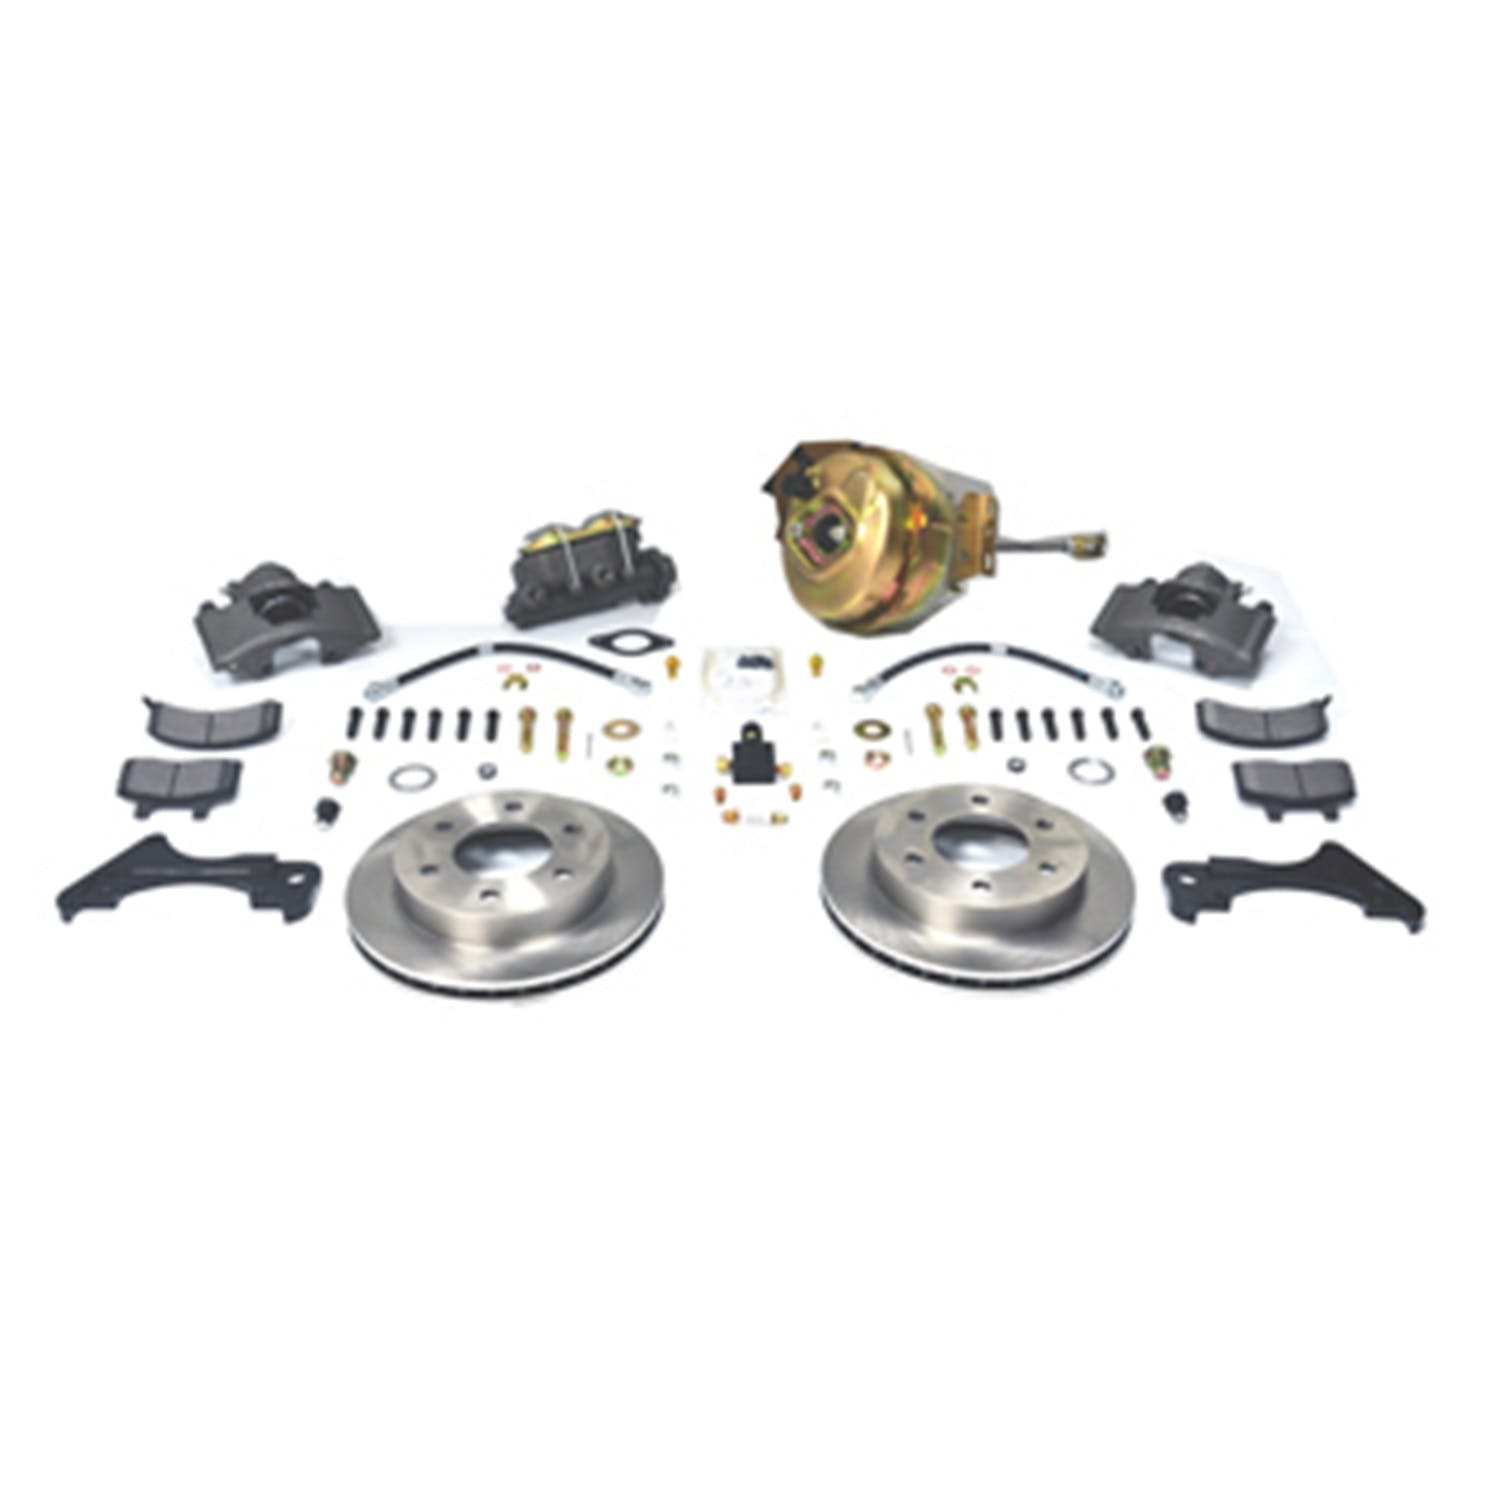 Stainless Steel Brakes A126-71 Front drm/dsc conv kit 67-70 GM 6-lug